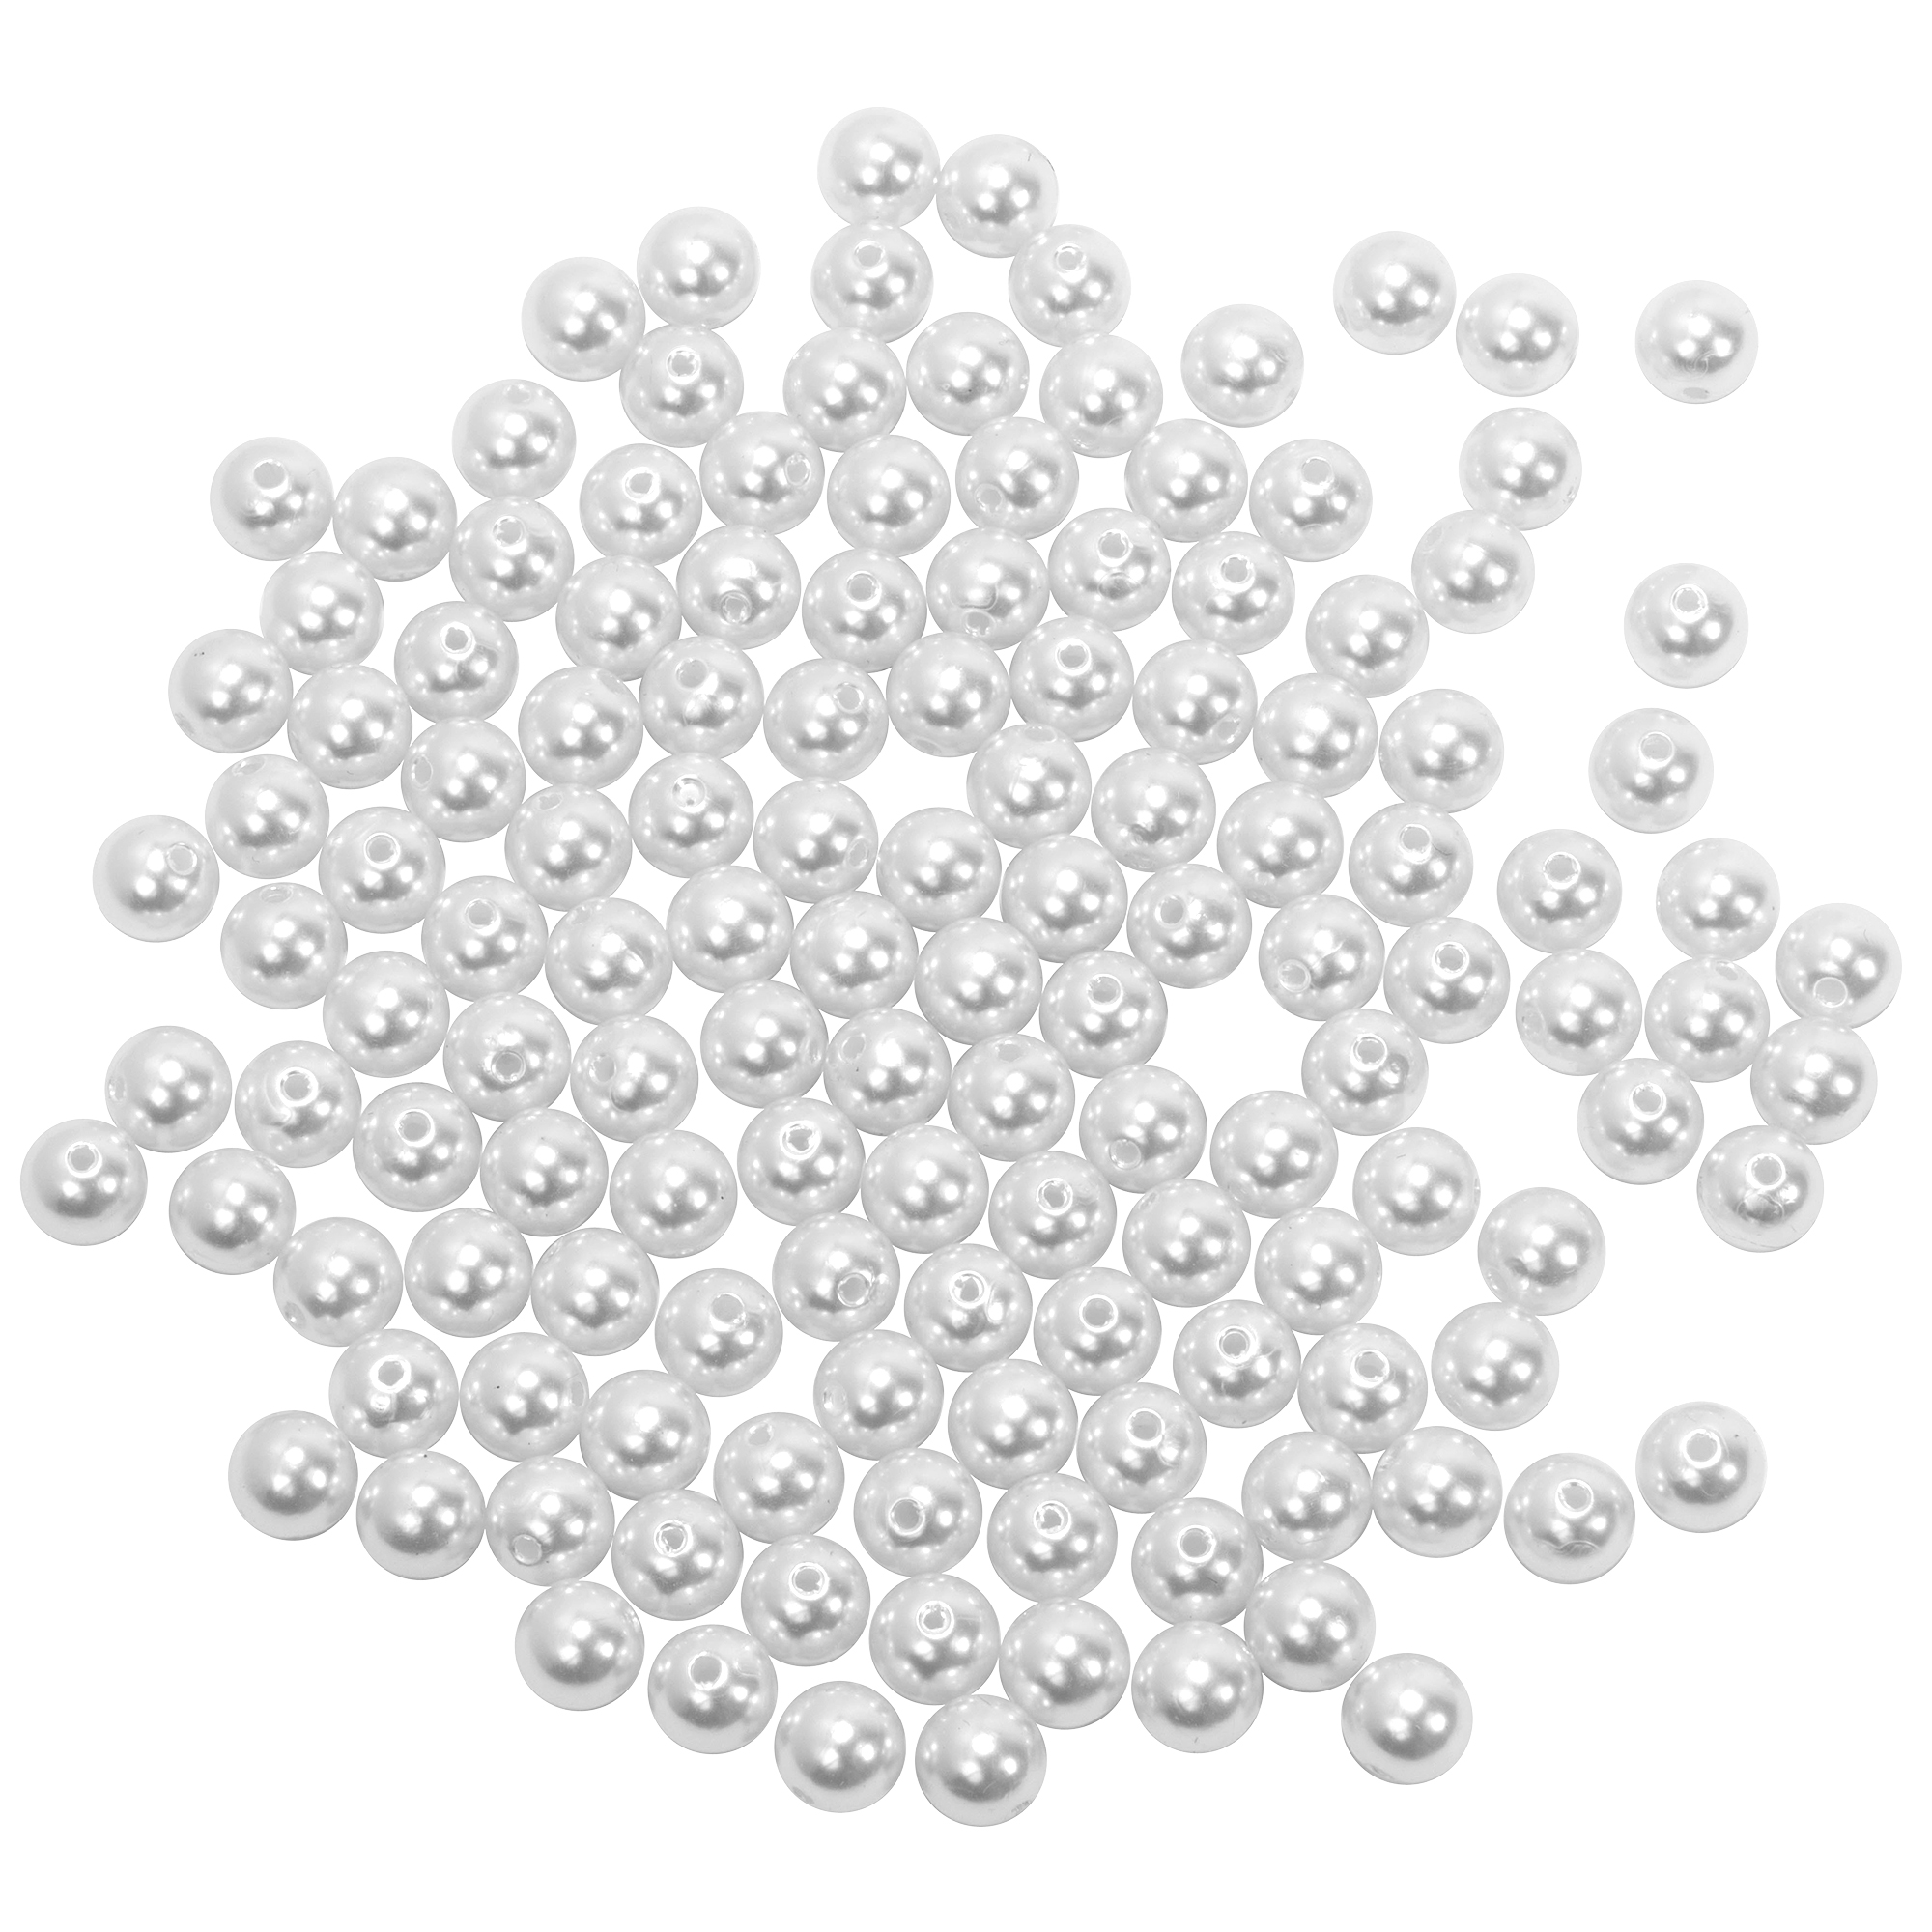 10mm Craft Pearl Beads With Hole 454g/Bag - White